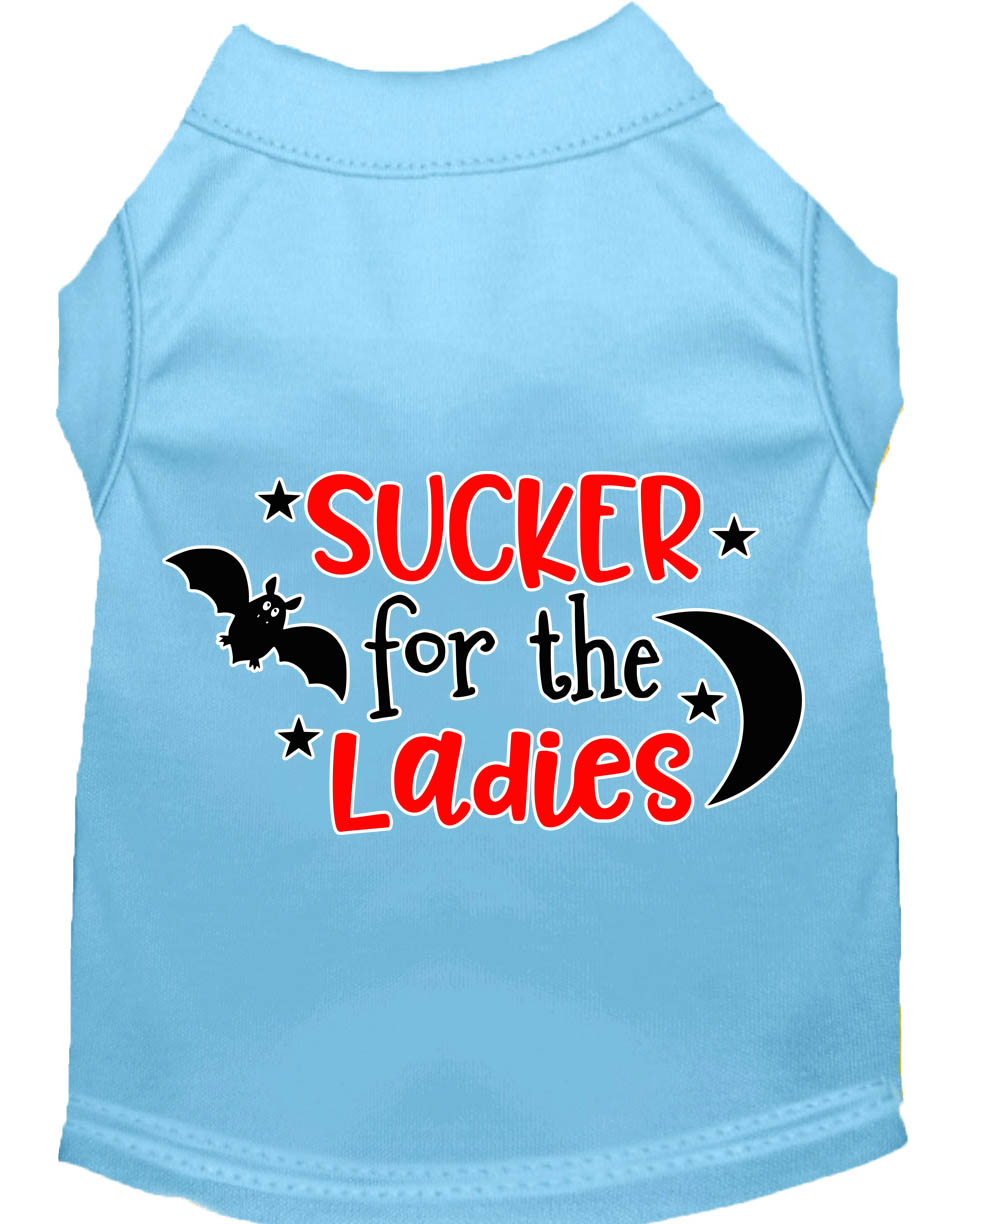 Sucker for the Ladies Screen Print Dog Shirt Baby Blue Med